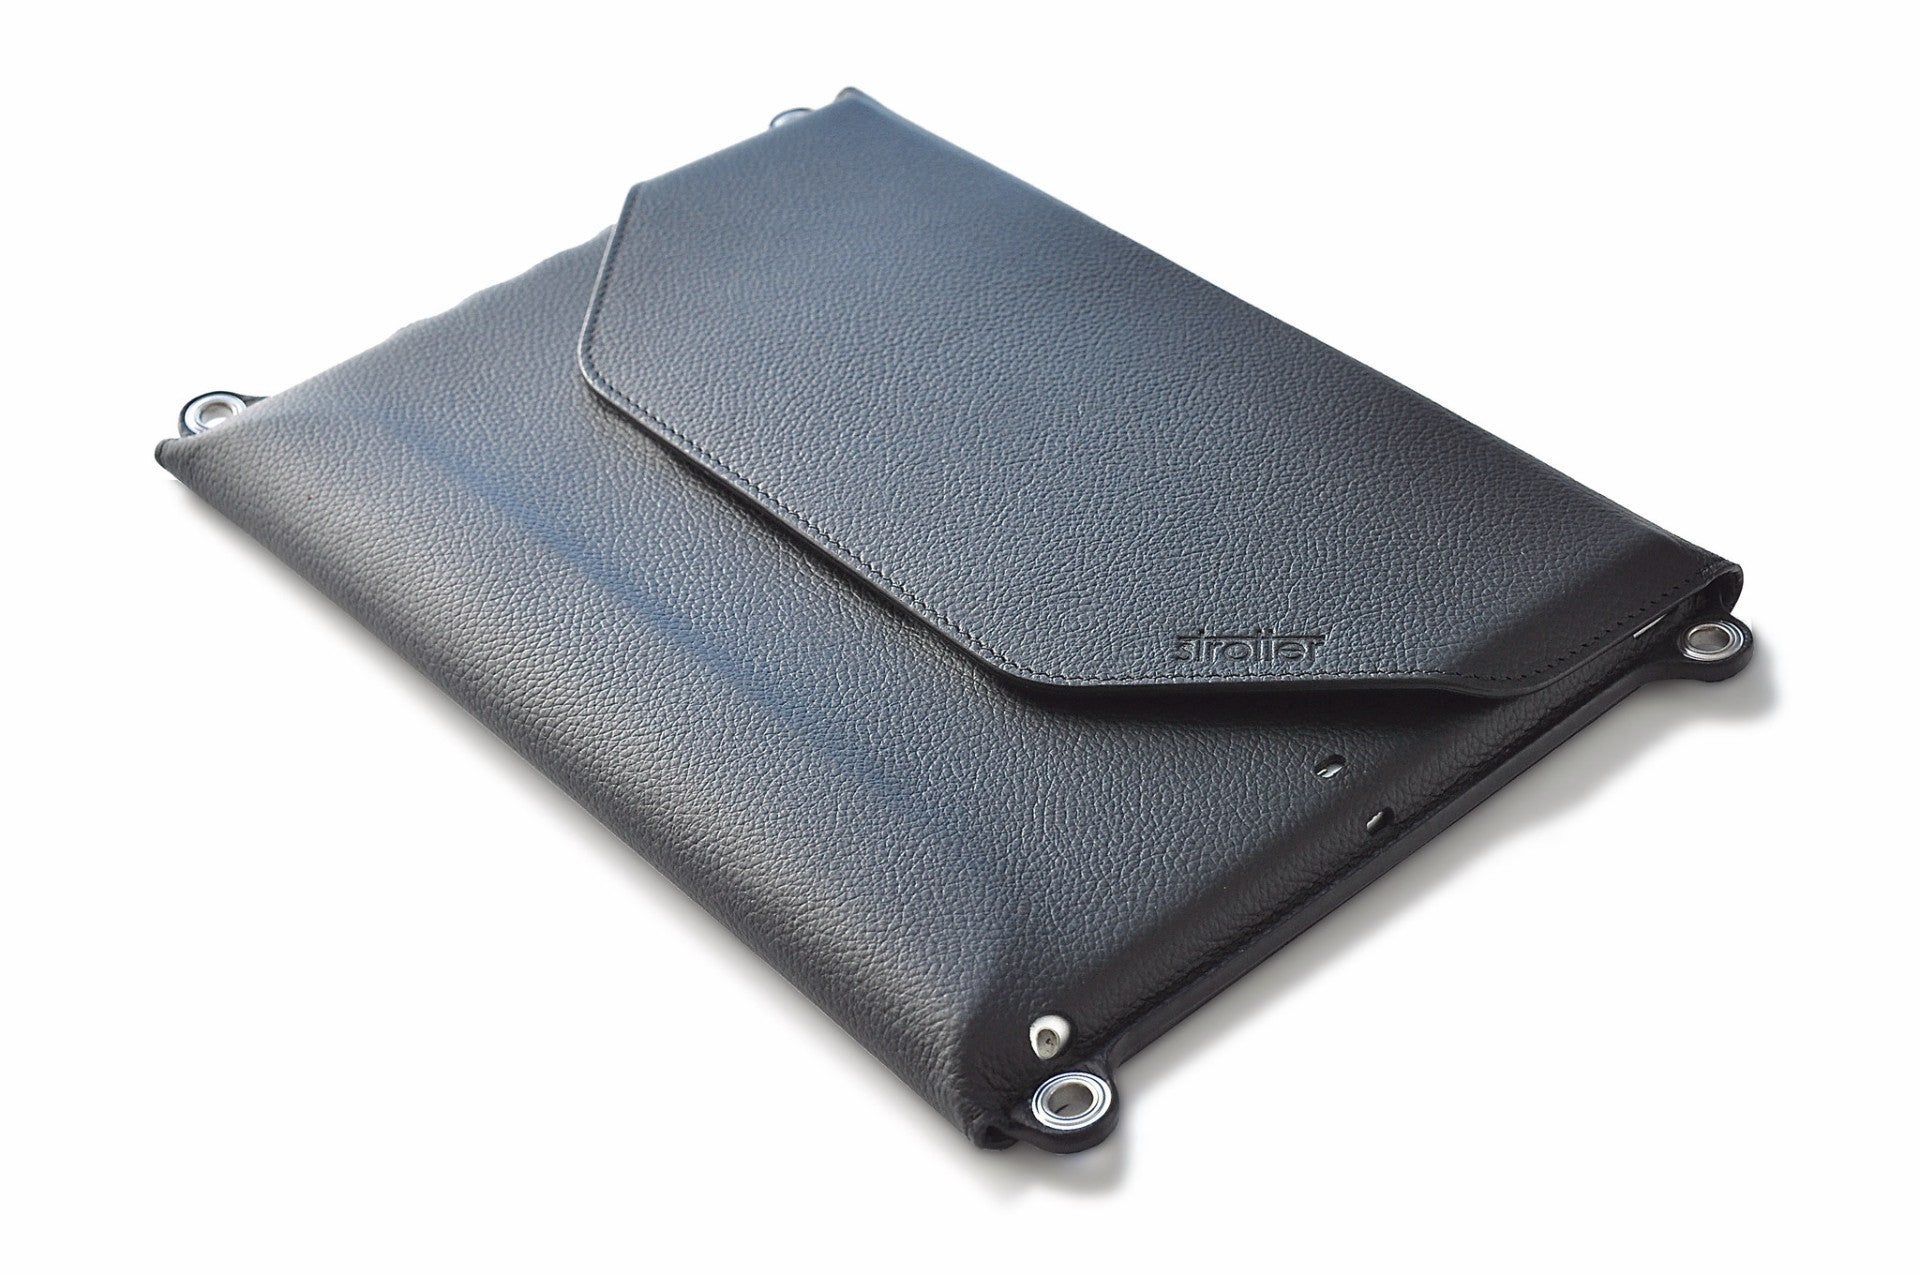 Leather case/cover for iPad Pro 9.7" - made in Italy